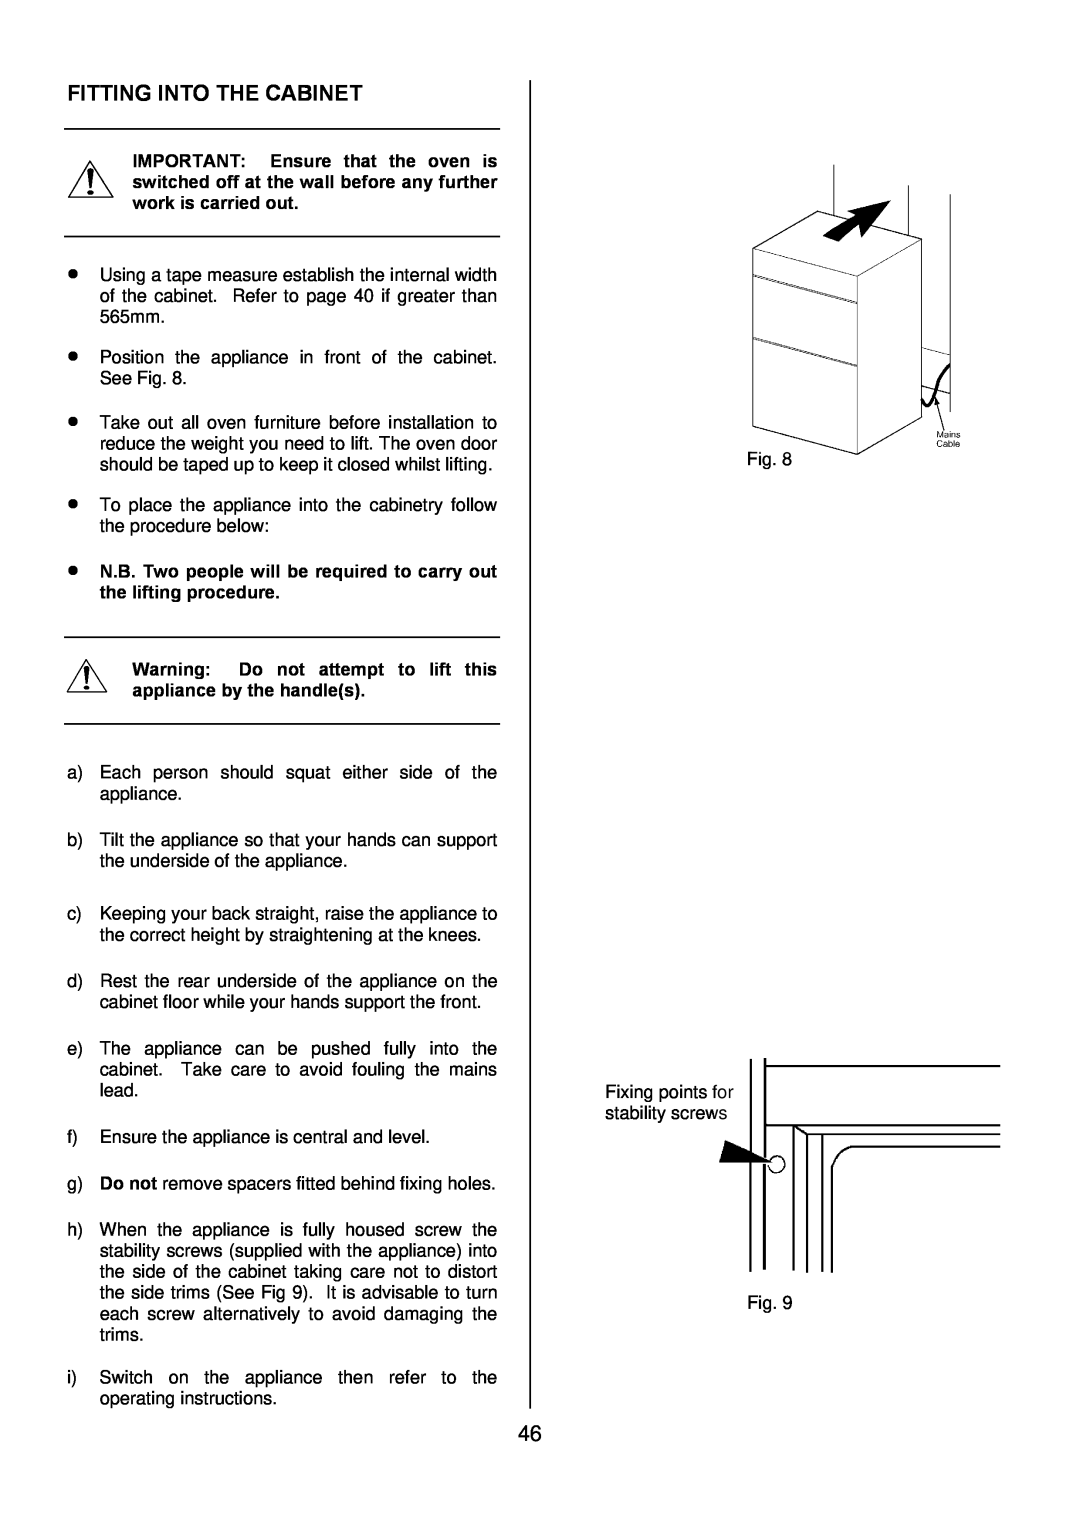 Zanussi ZDQ 995 manual Fitting Into The Cabinet, N.B. Two people will be required to carry out the lifting procedure 